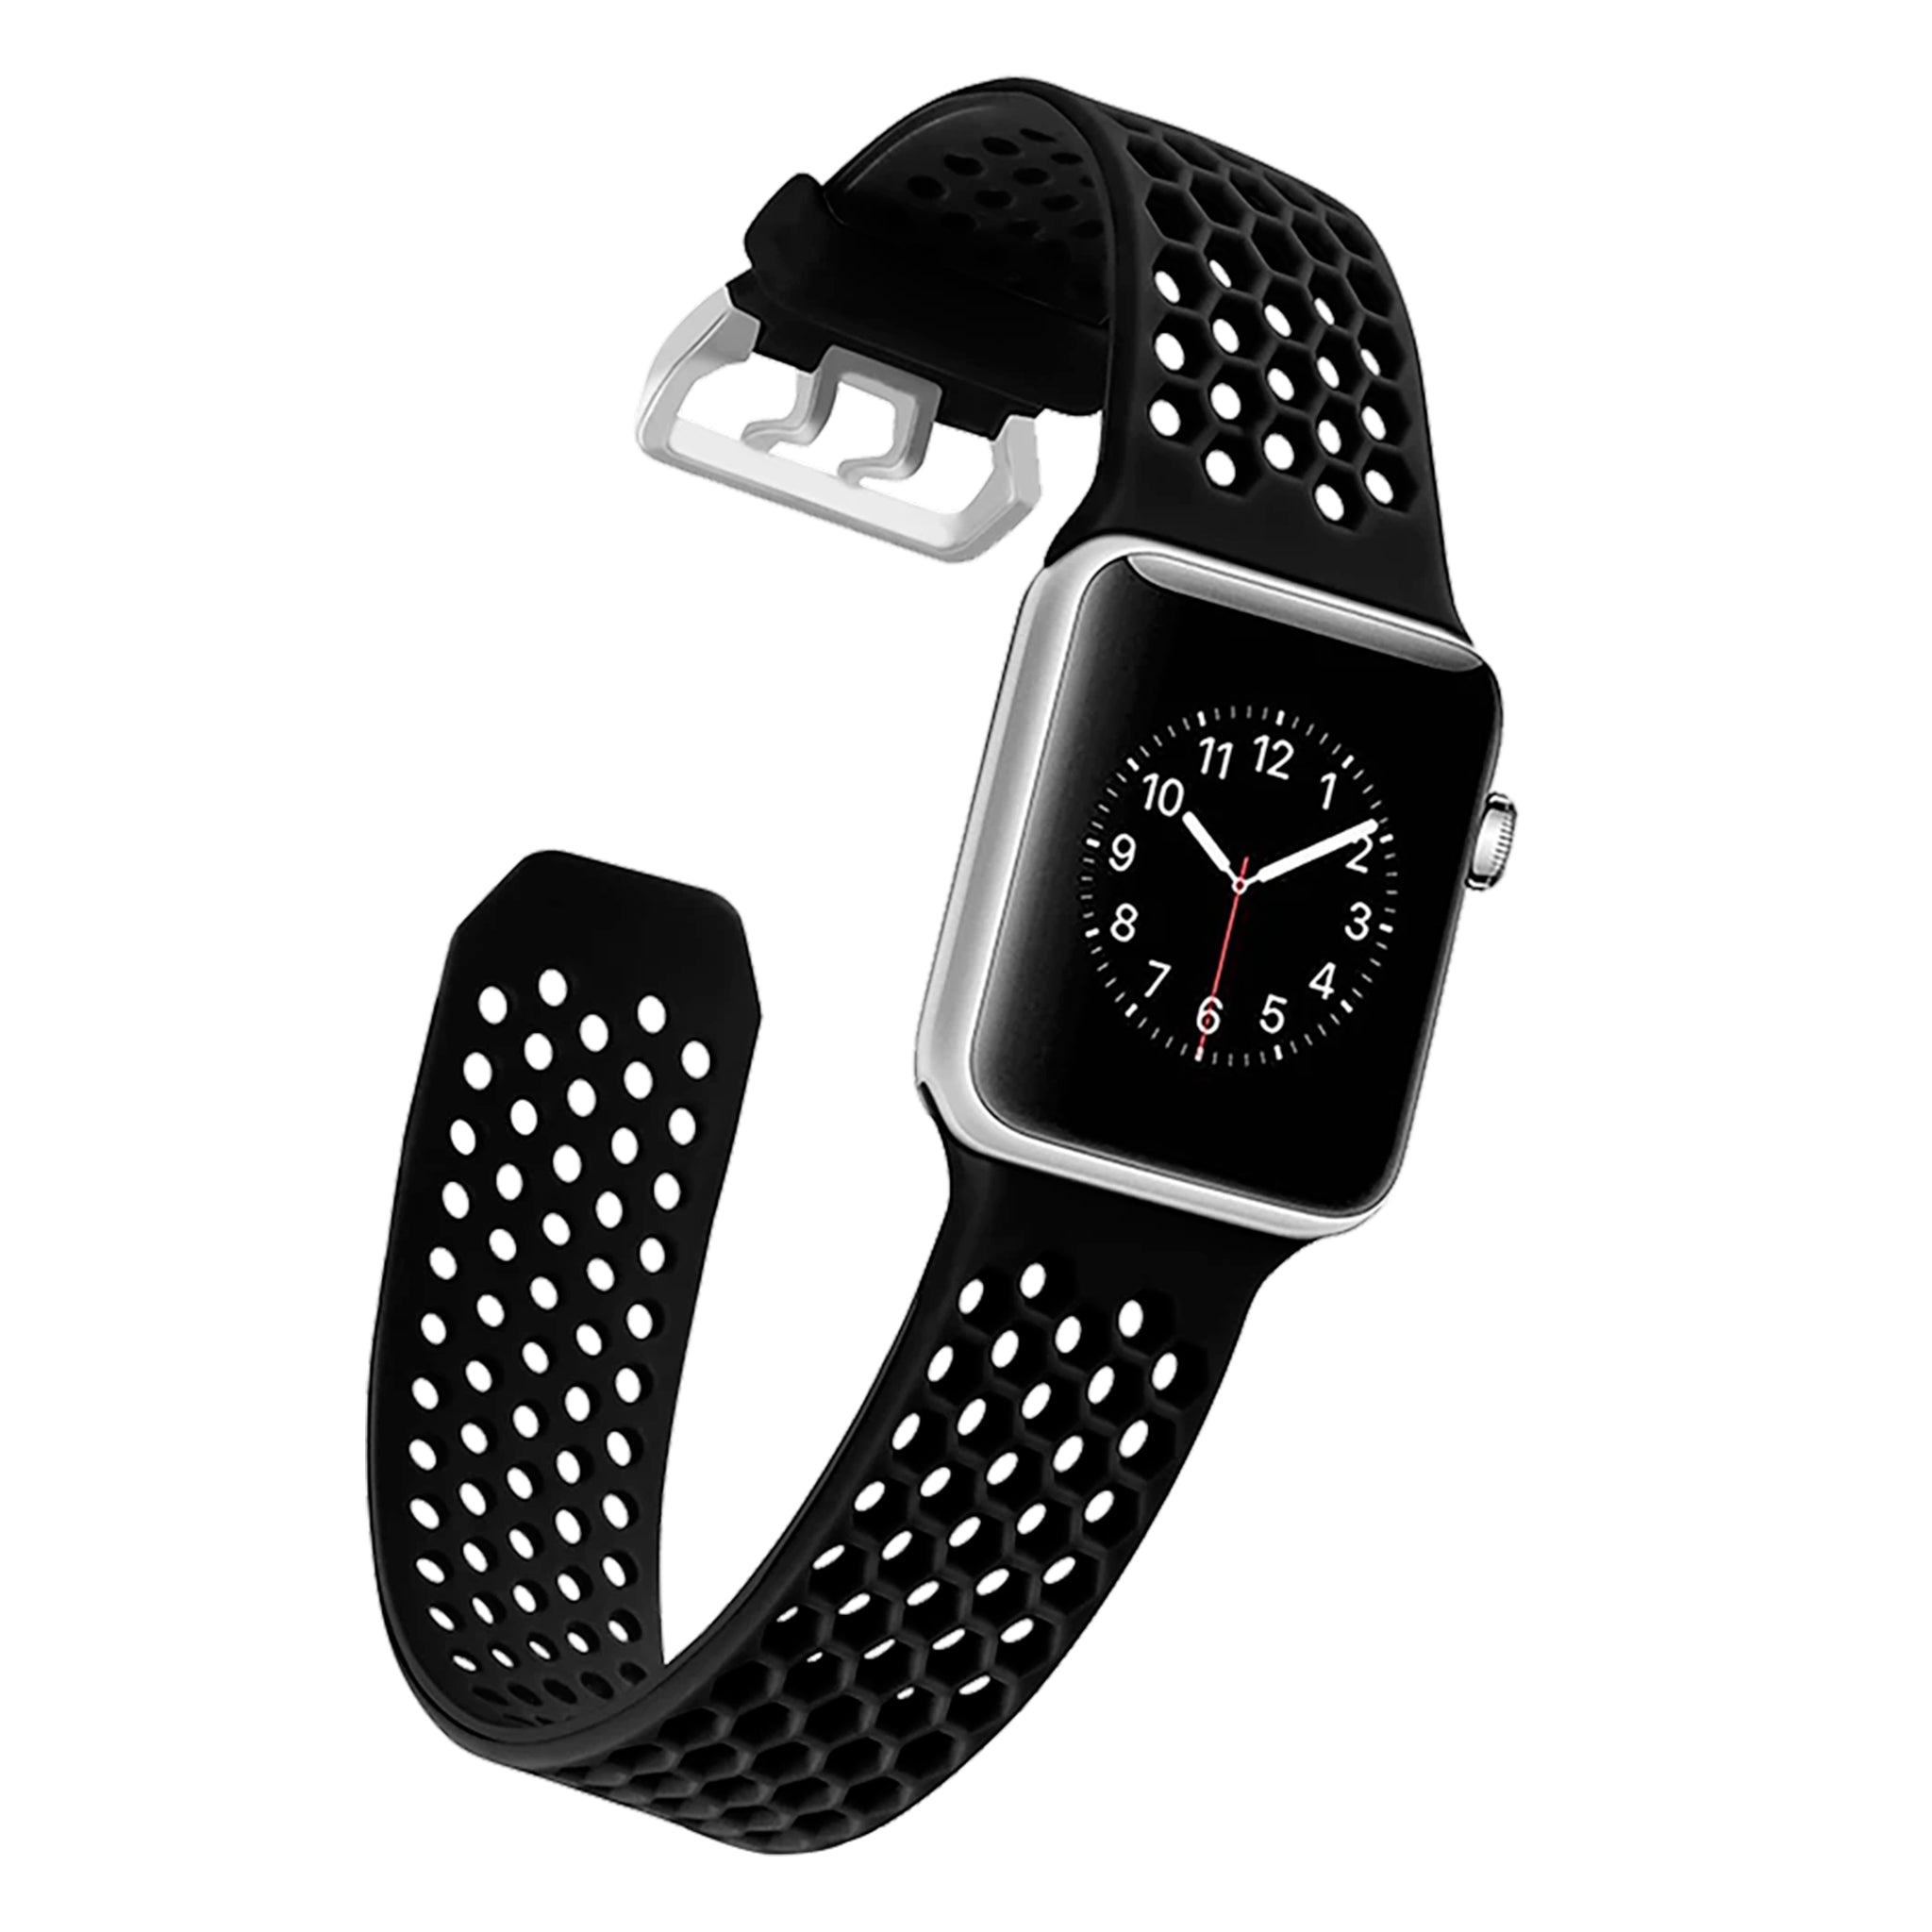 Itskins - Silicone Sport Watch Band For Apple Watch 44mm - Black